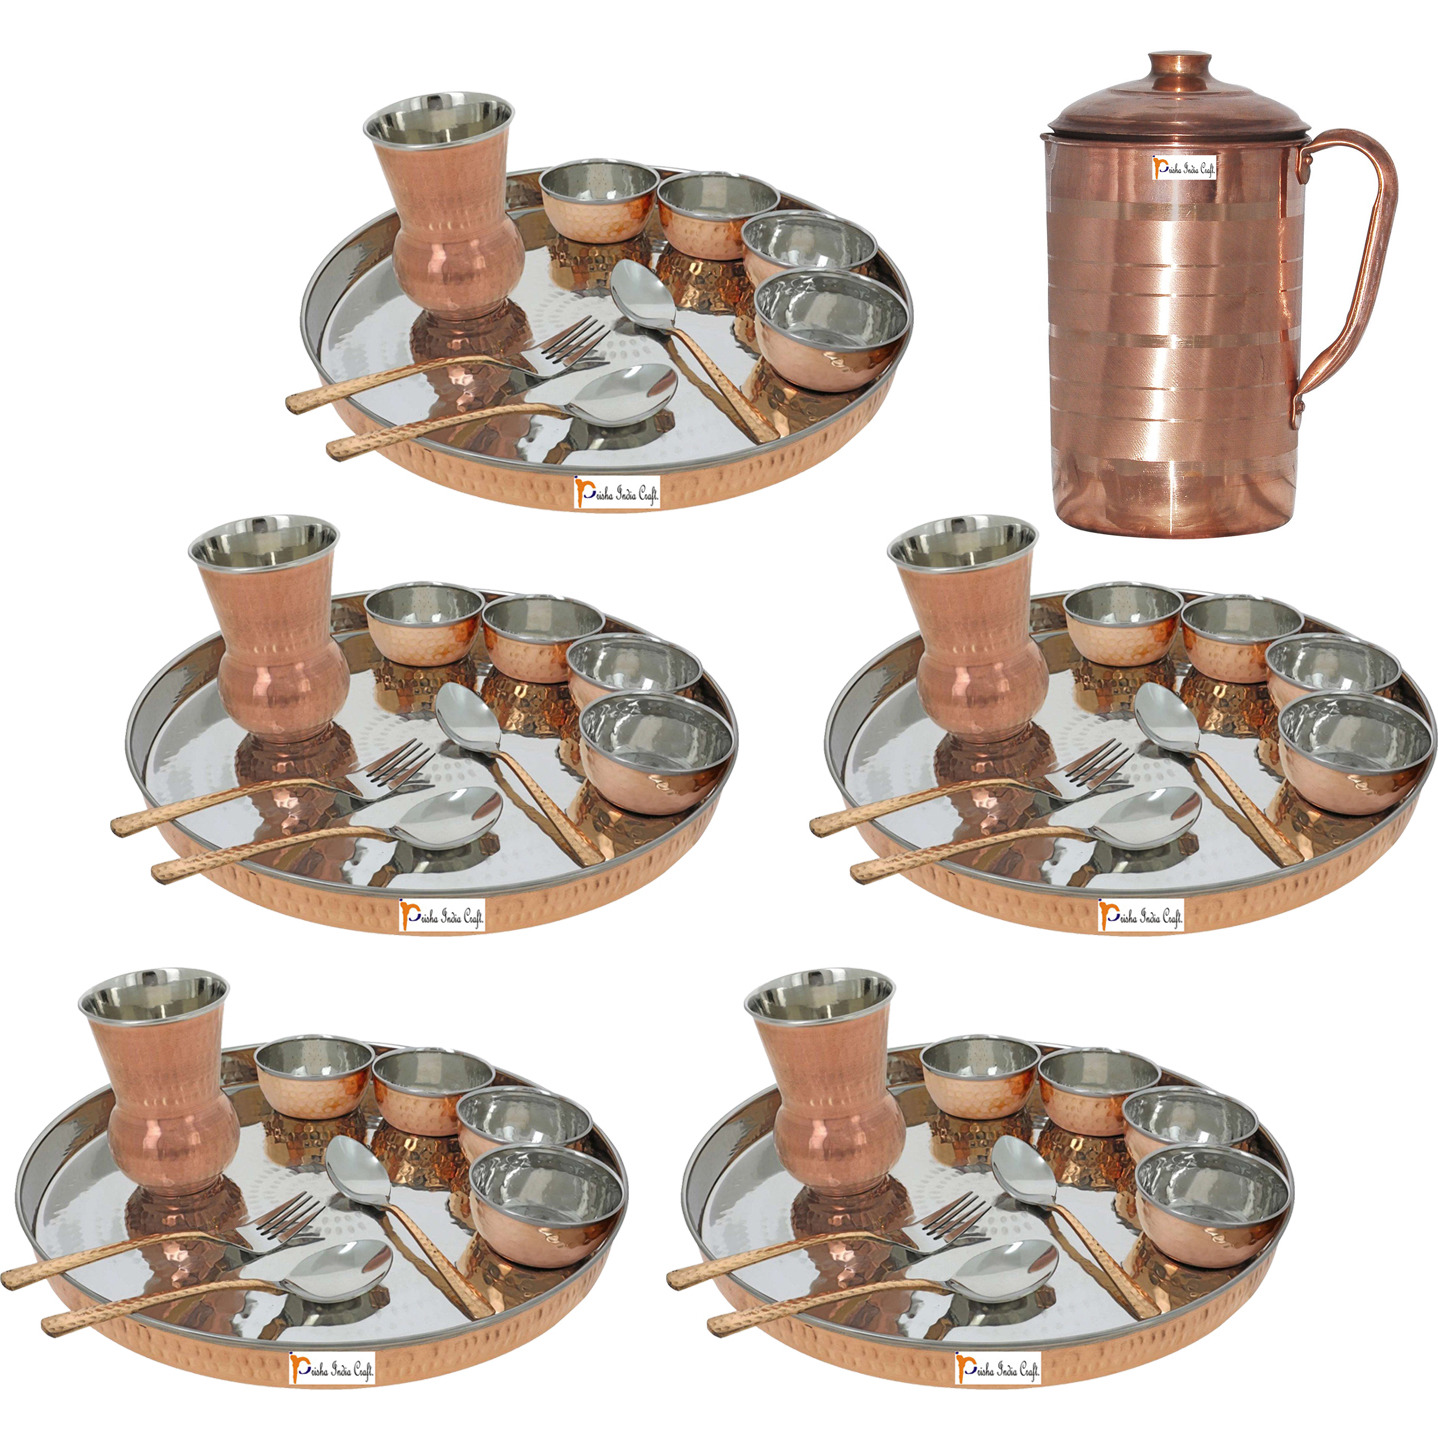 Prisha India Craft B. Set of 5 Dinnerware Traditional Stainless Steel Copper Dinner Set of Thali Plate, Bowls, Glass and Spoons, Dia 13  With 1 Pure Copper Pitcher Jug - Christmas Gift